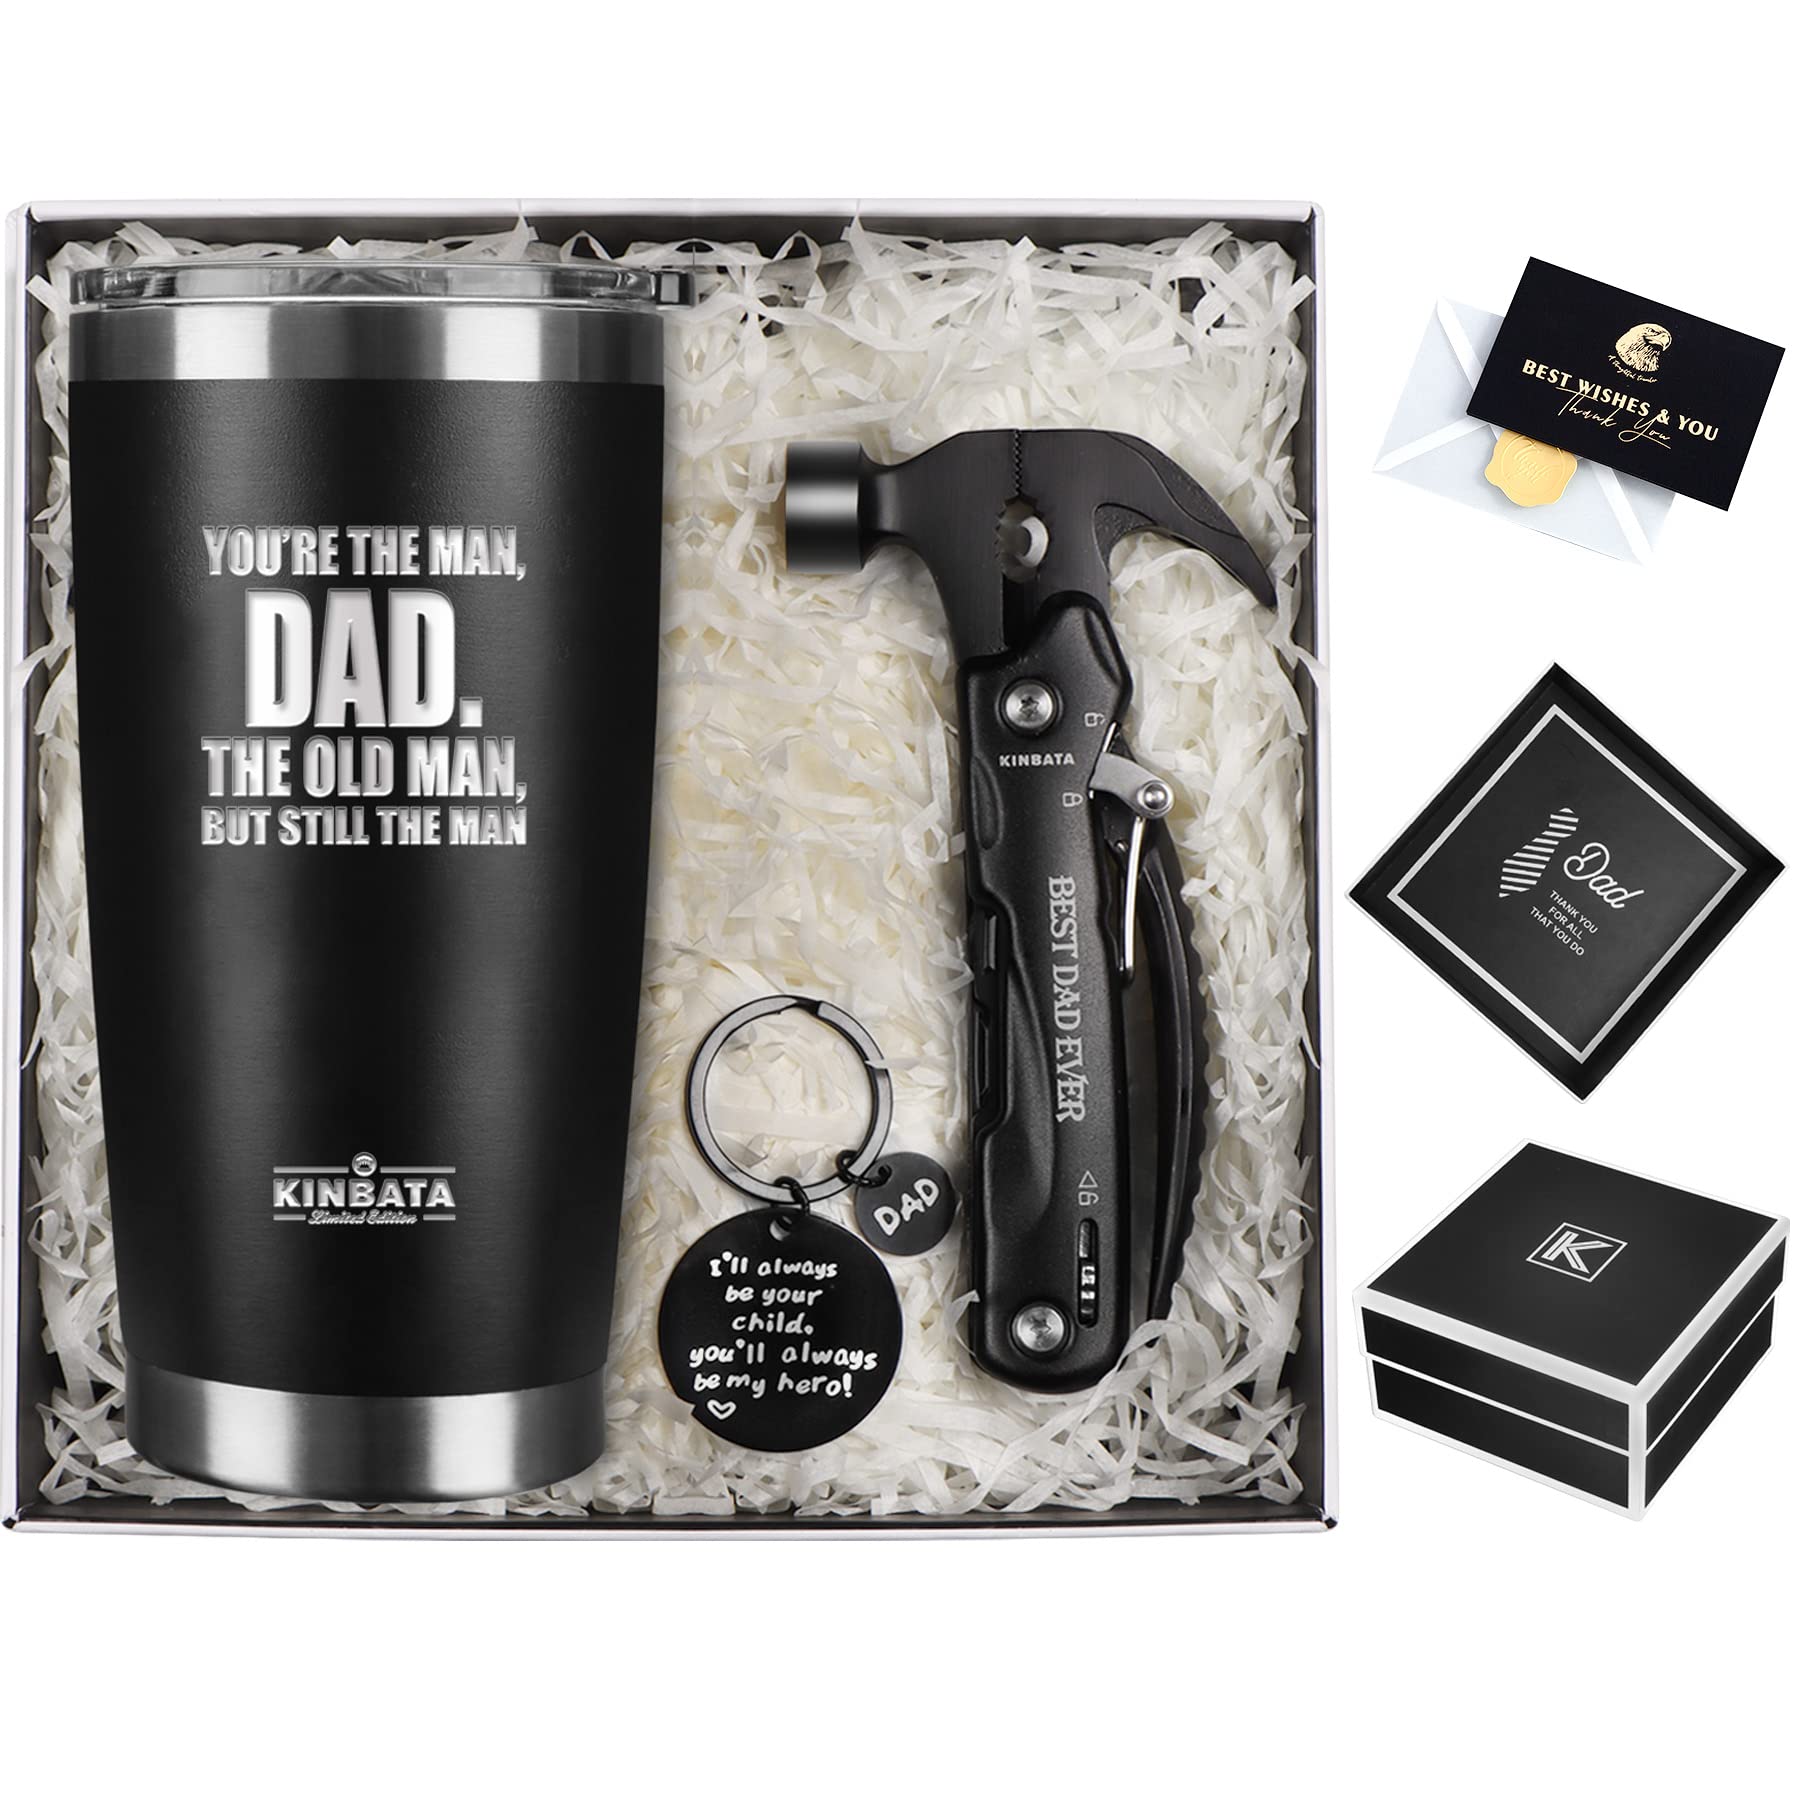 Gifts for Dad from Daughter Son Kids - Dad Gifts - Birthday Gifts for Dad,  Dad Birthday Gift, Fathers Day - Gift for Dad, Present for Dad Gift Ideas, Father  Gifts -